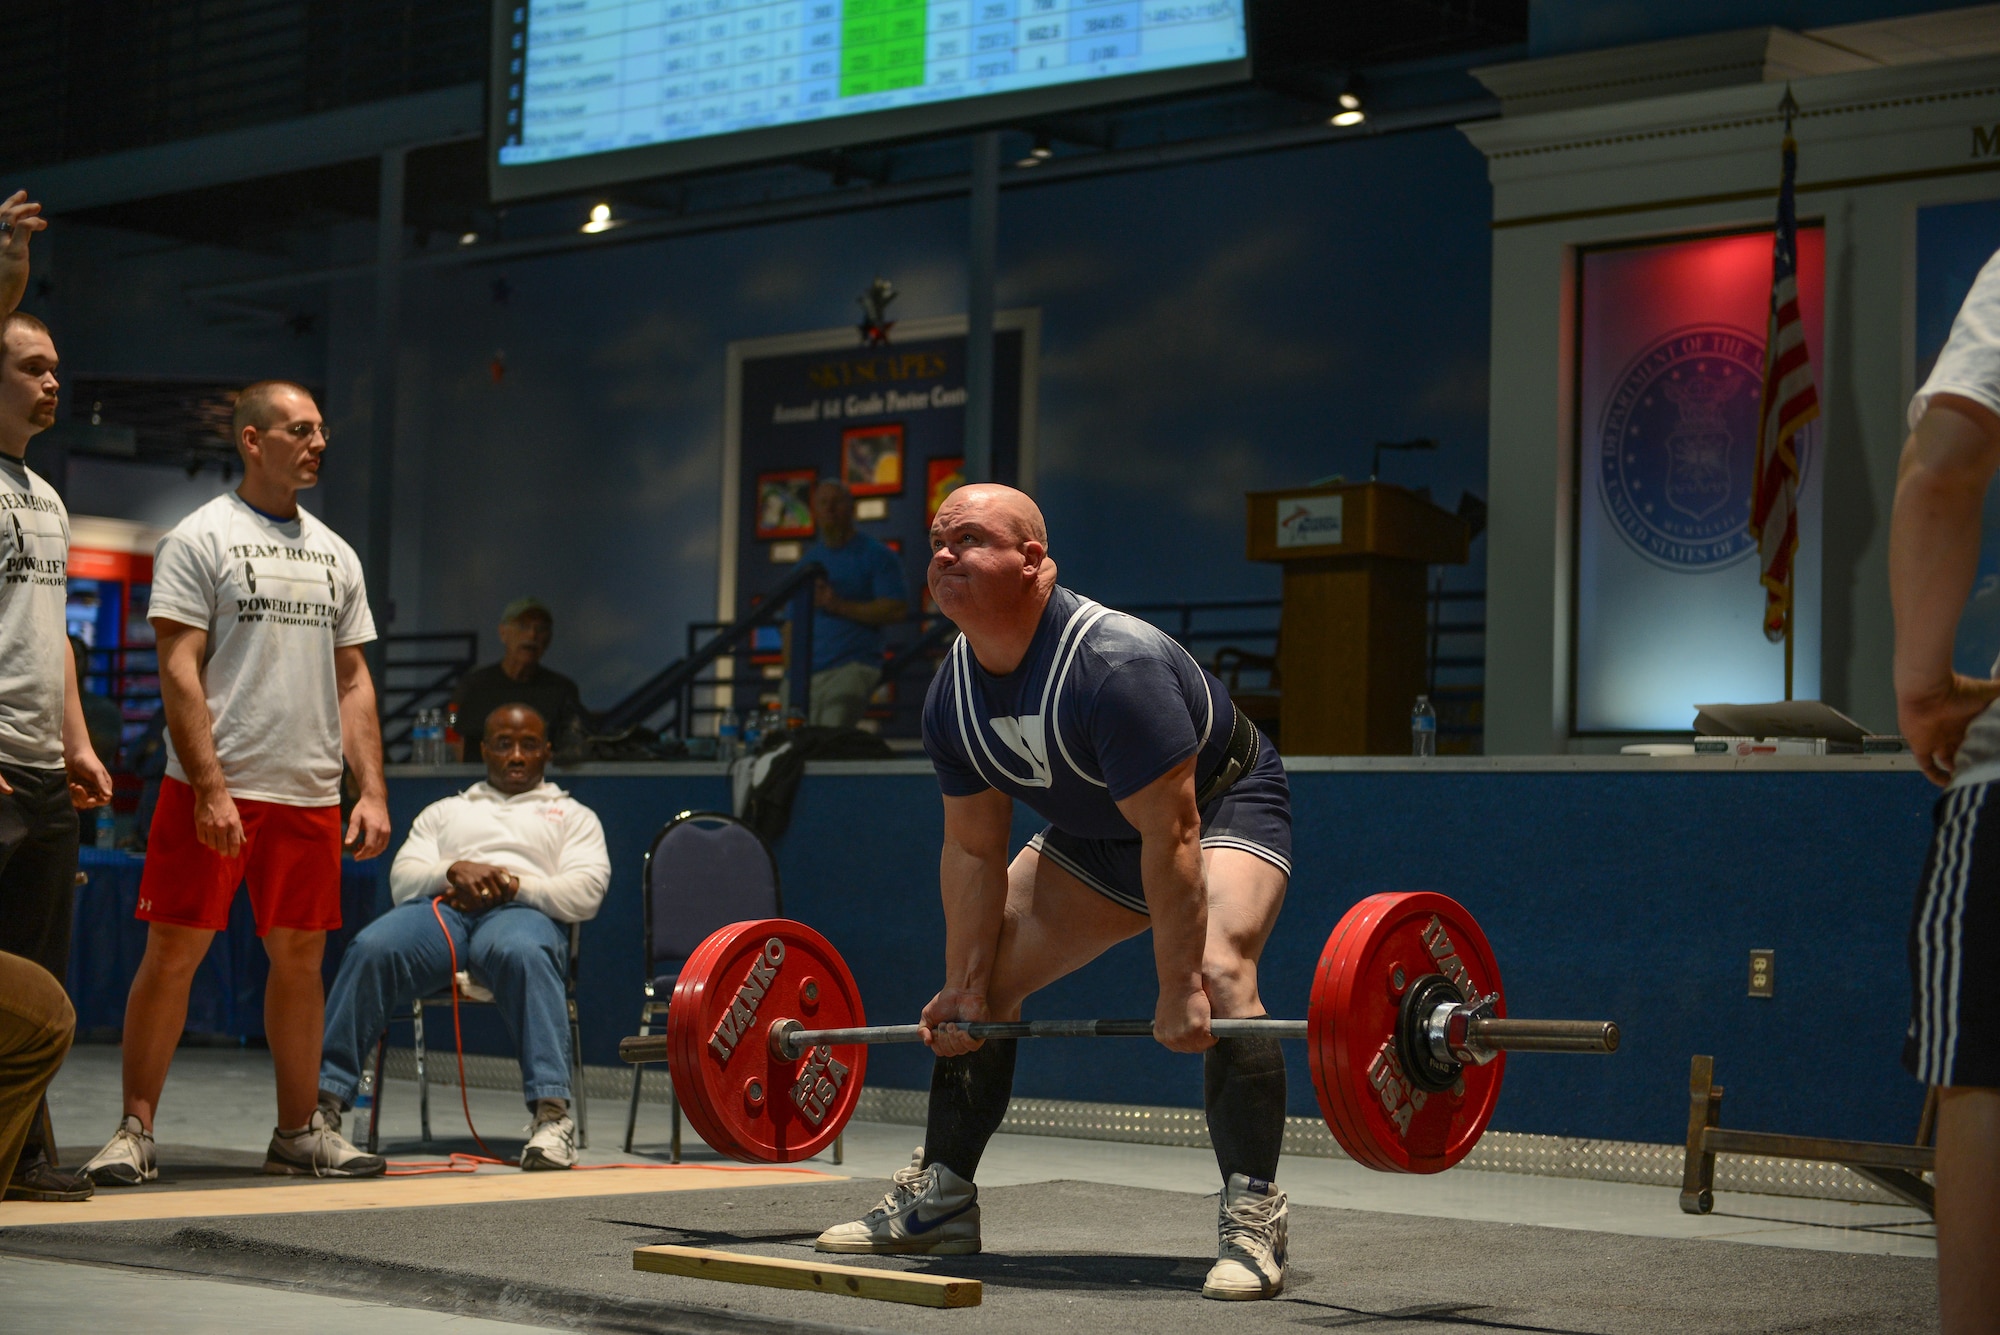 U.S. Air Force Tech. Sgt. Michael Lloyd of the 165th Airlift Wing, Georgia Air National Guard performs a deadlift, Jan. 25, 2014, at the Museum of Aviation in Warner Robins, Ga. Lloyd broke four U.S.A. Powerlifting Georgia state records at the 2014 Winter Classic and Single Ply Invitational. He set a record for squat, bench press, three event total (squat, bench press, deadlift), and bench press only for the Masters Division in his weight class at his first powerlifting competition. (U.S. Air National Guard photo by Master Sgt. Charles Delano/Released)